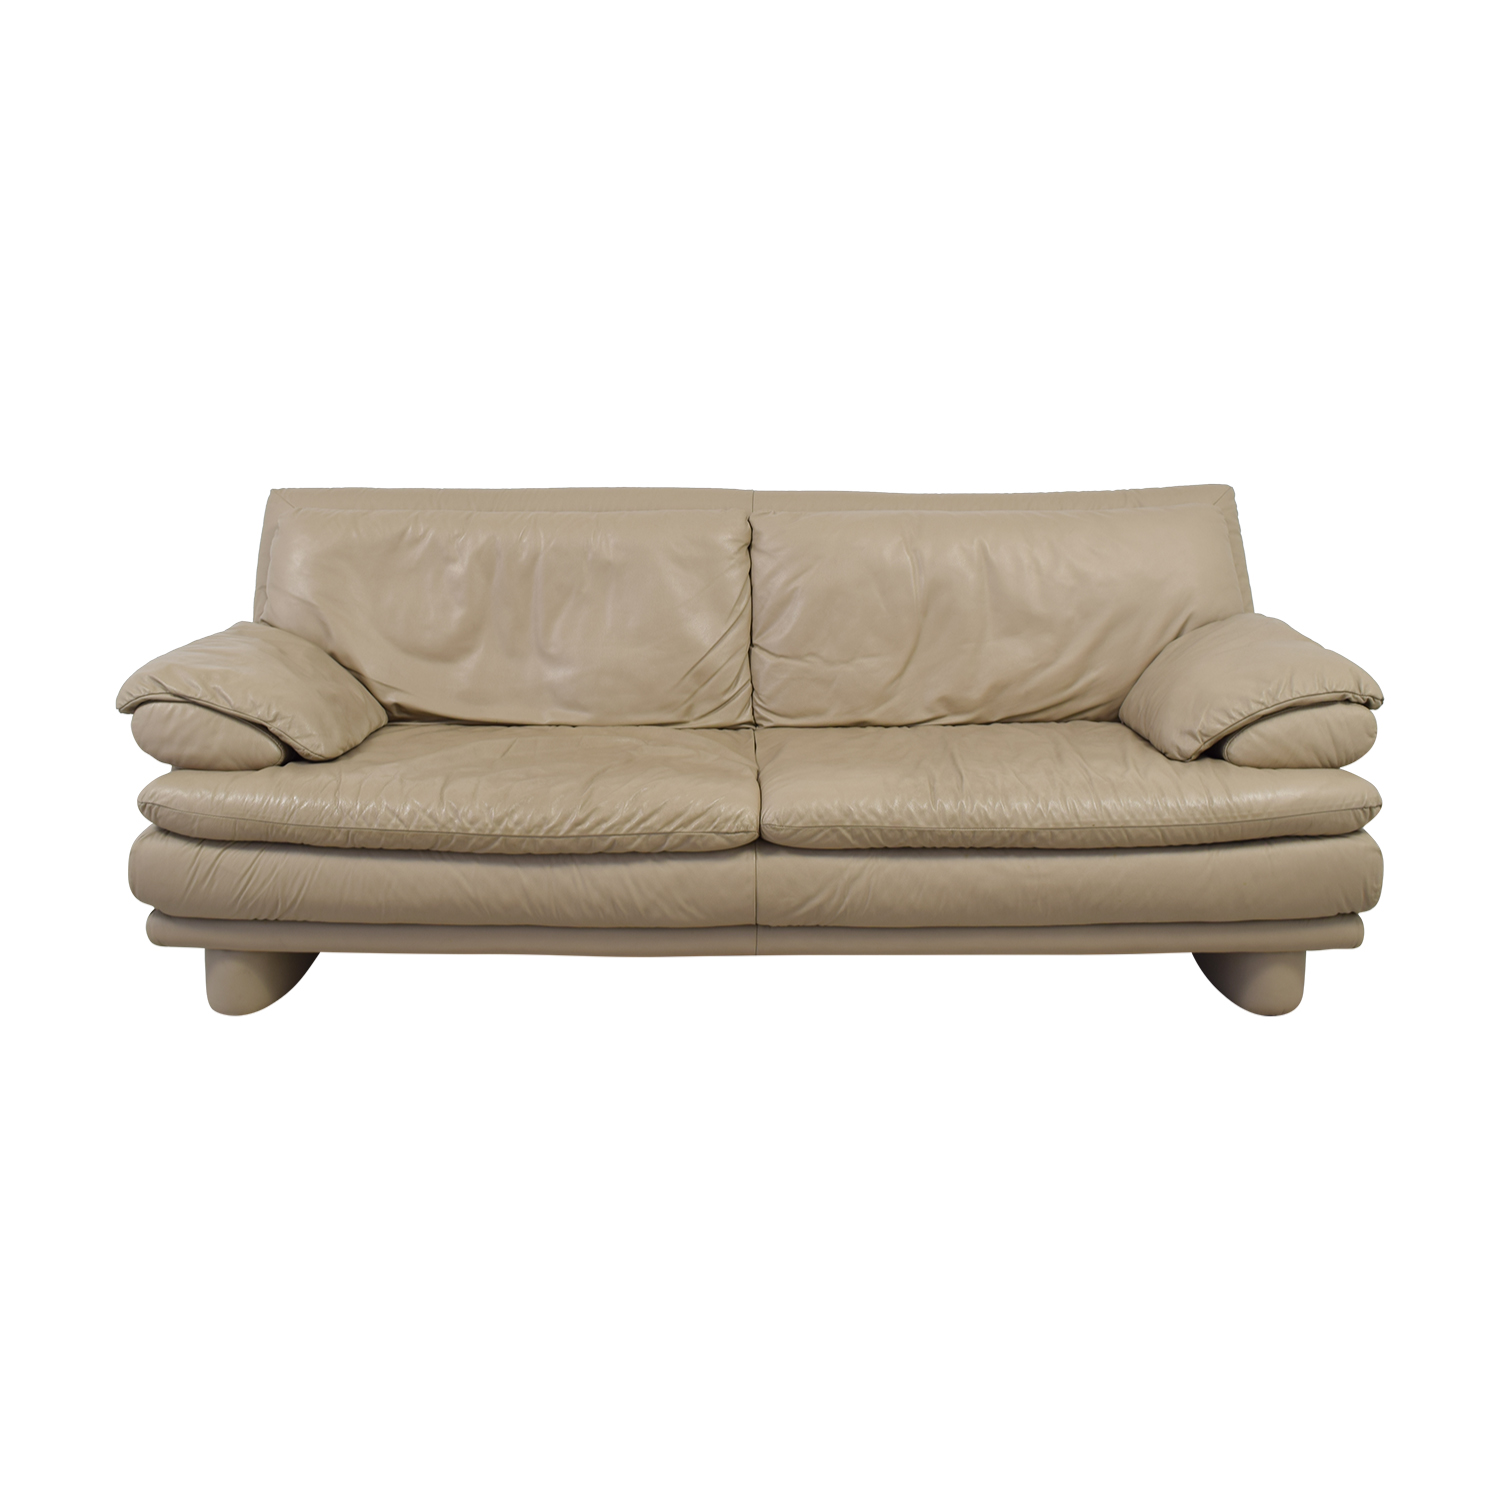 used sofa maurice villency maurice villency two-cushion tan leather couch coupon PRRGNLT